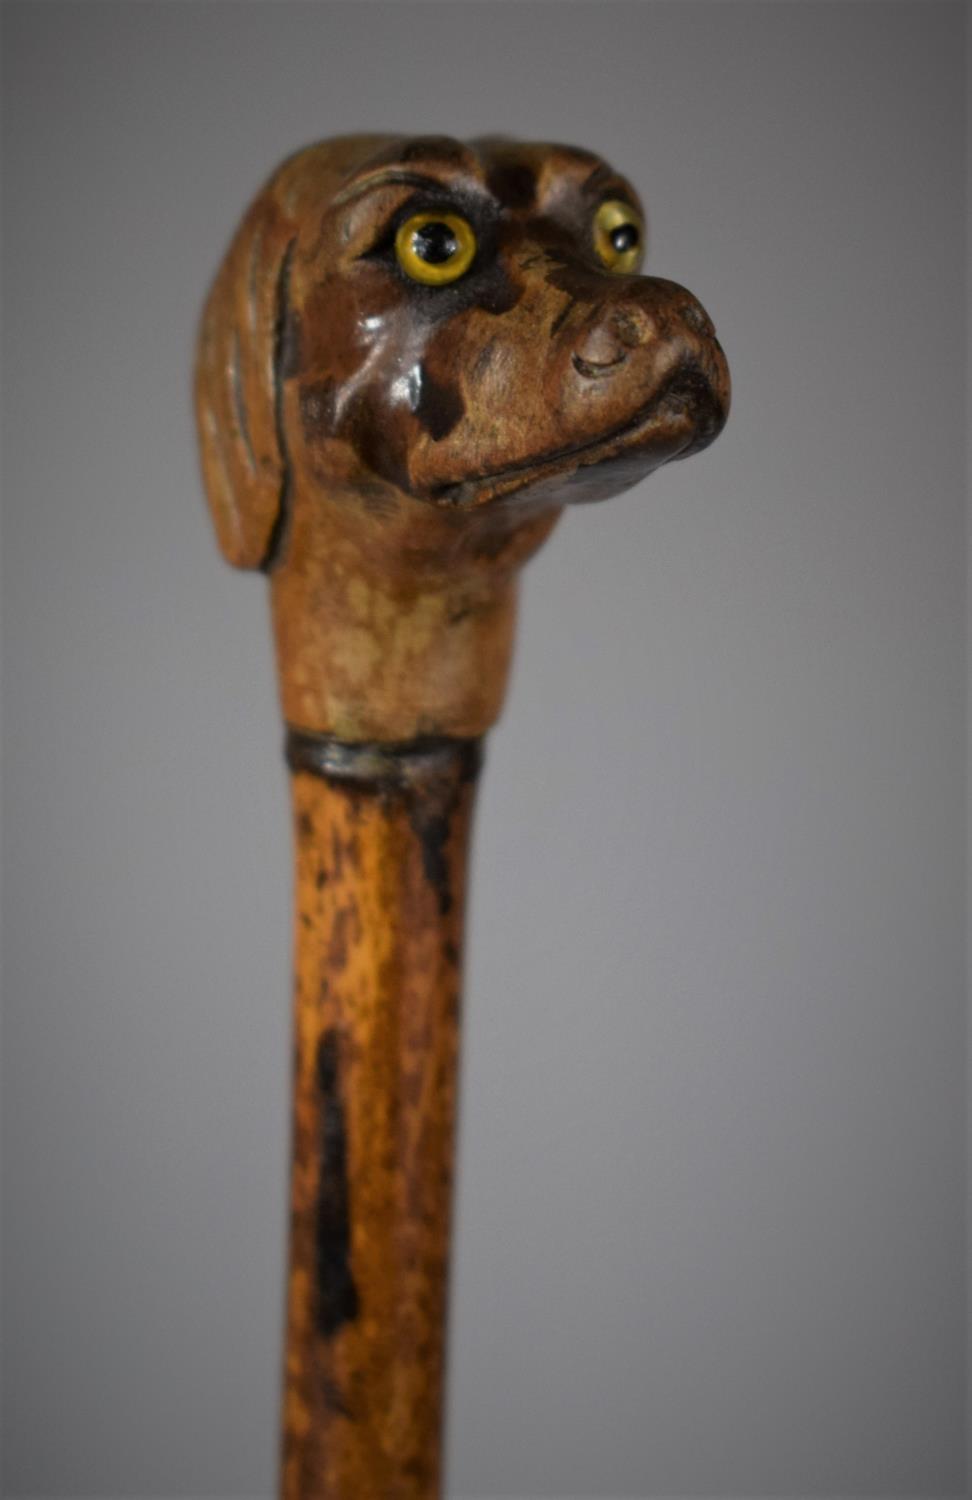 A 19th Century Bamboo Shafted Stick with Carved Dogs Head Finial Having Glass Eyes, 74cms Long